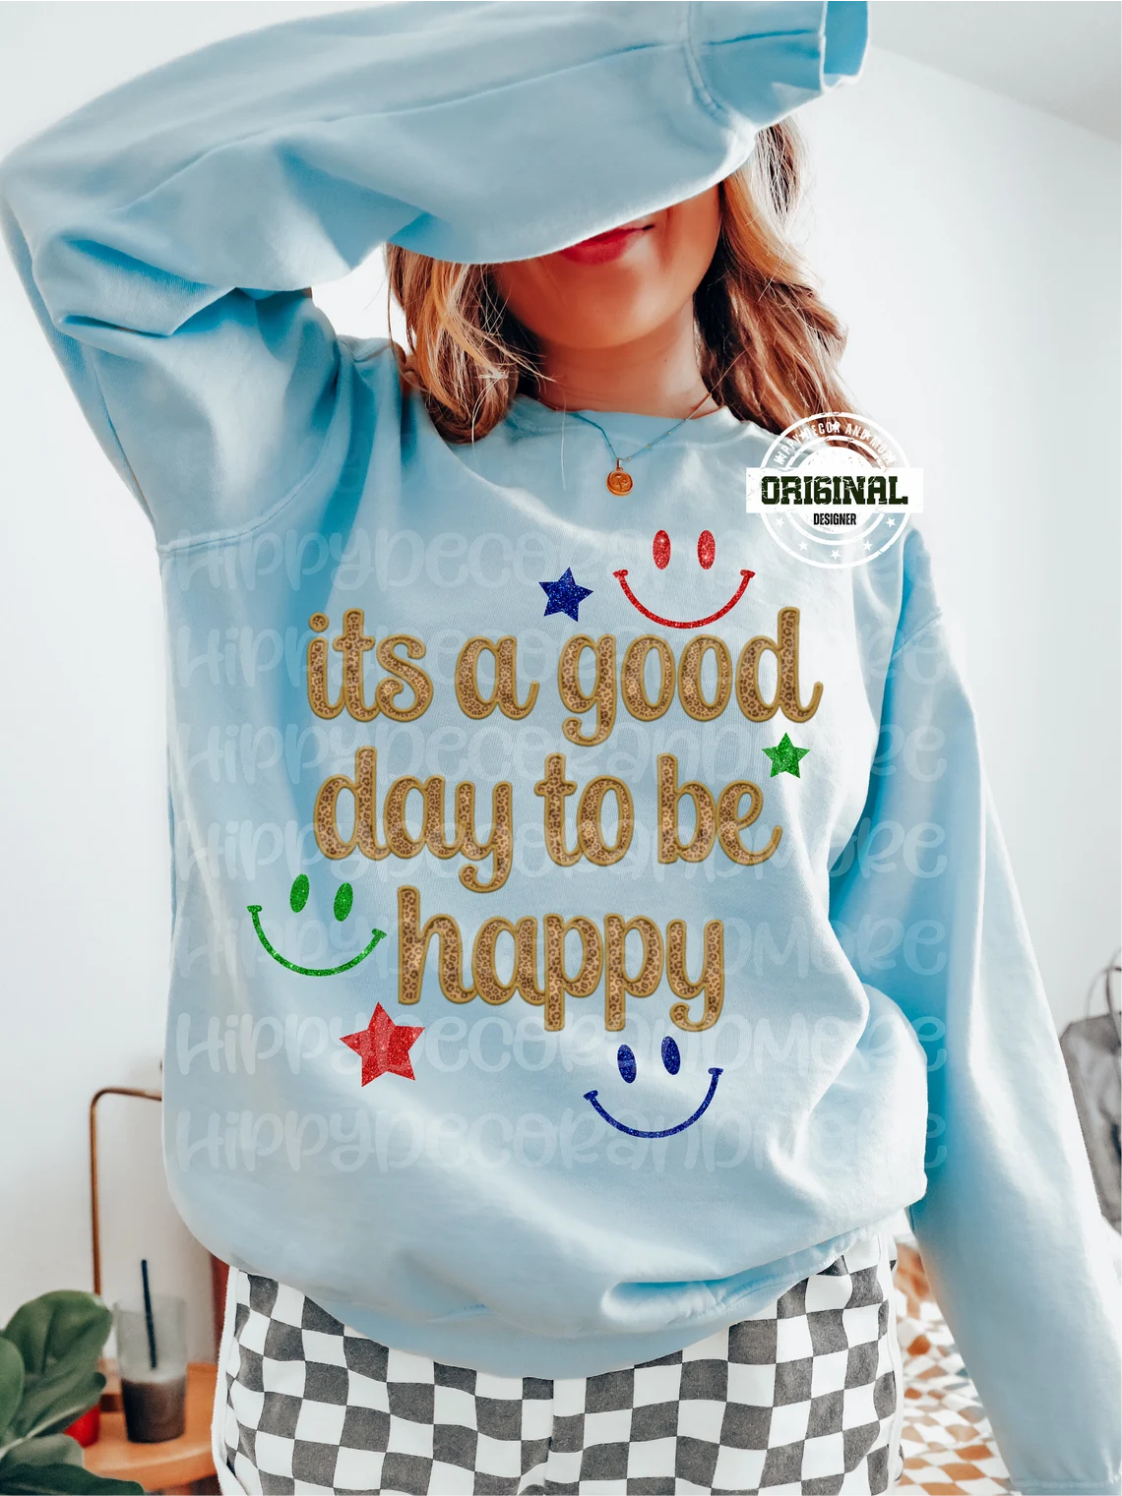 RTS It's a good day to be happy smiley face MATTE BREATHABLE CLEAR FILM SCREEN PRINT TRANSFER ADULT 10x12